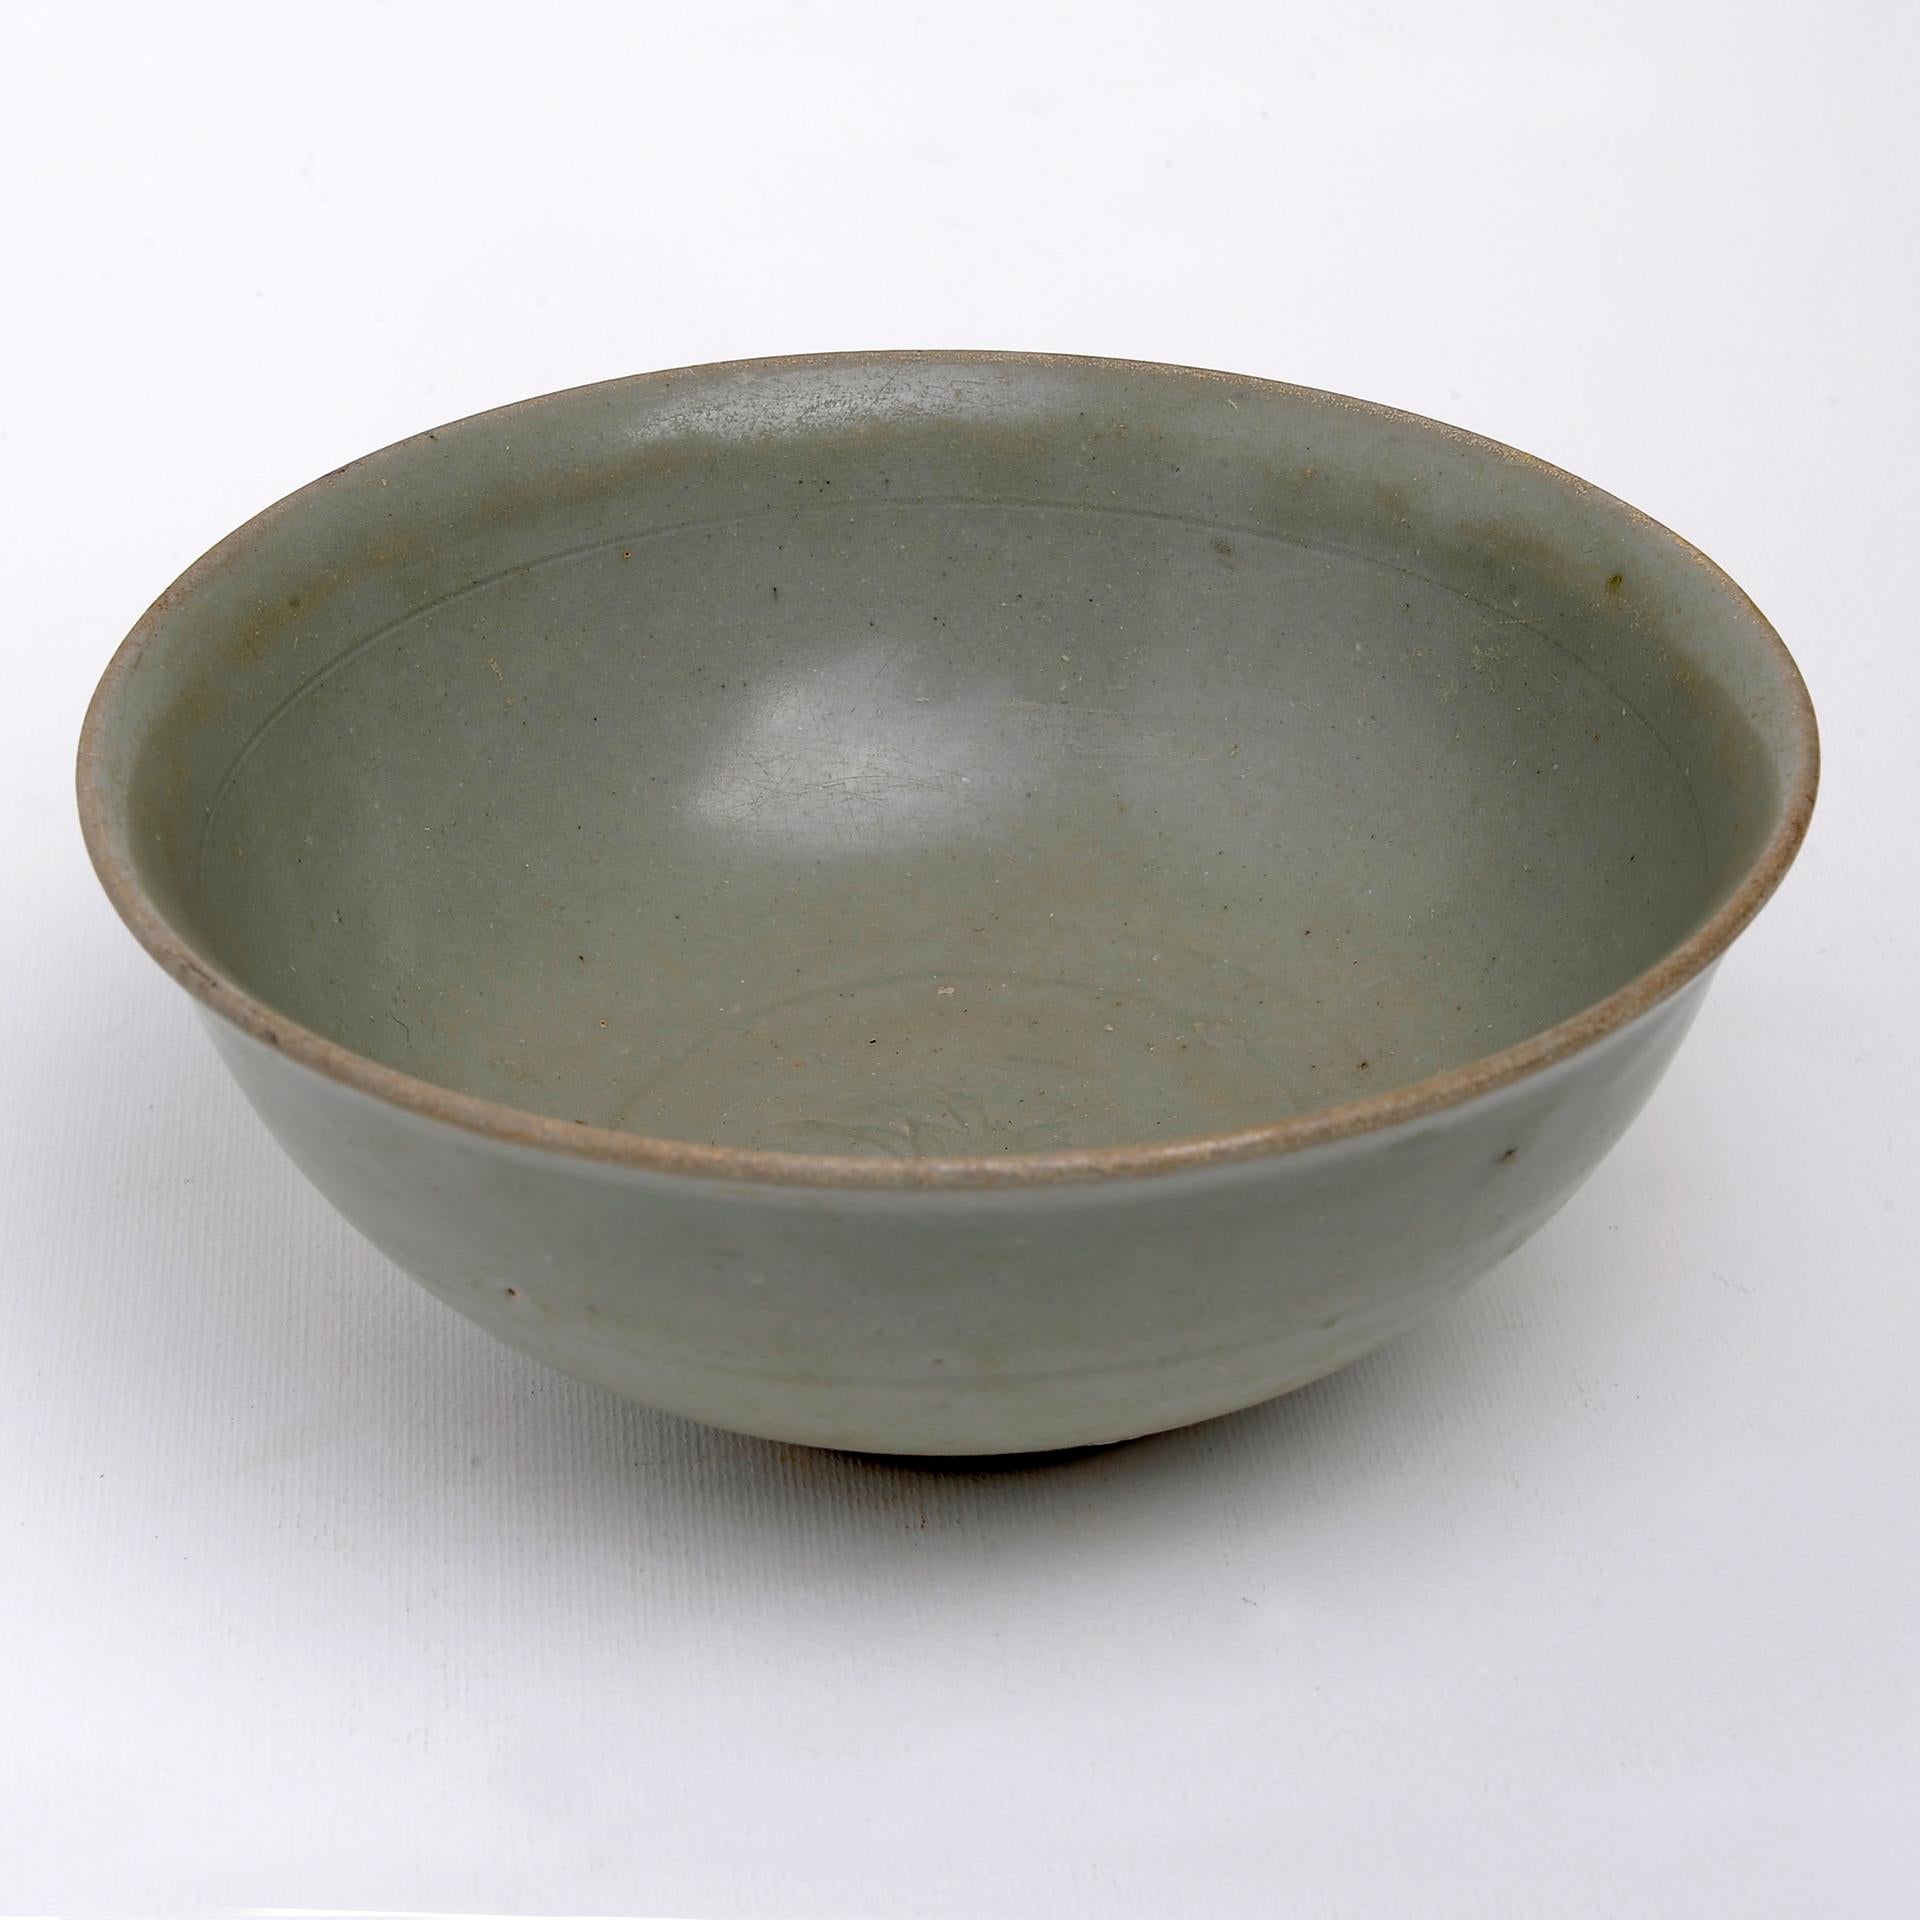 Celadon bowl from Song Dinasty: very antique!  from my private collection, now on sale.  see the others published under my name Enrica Pasino.
They are rare.